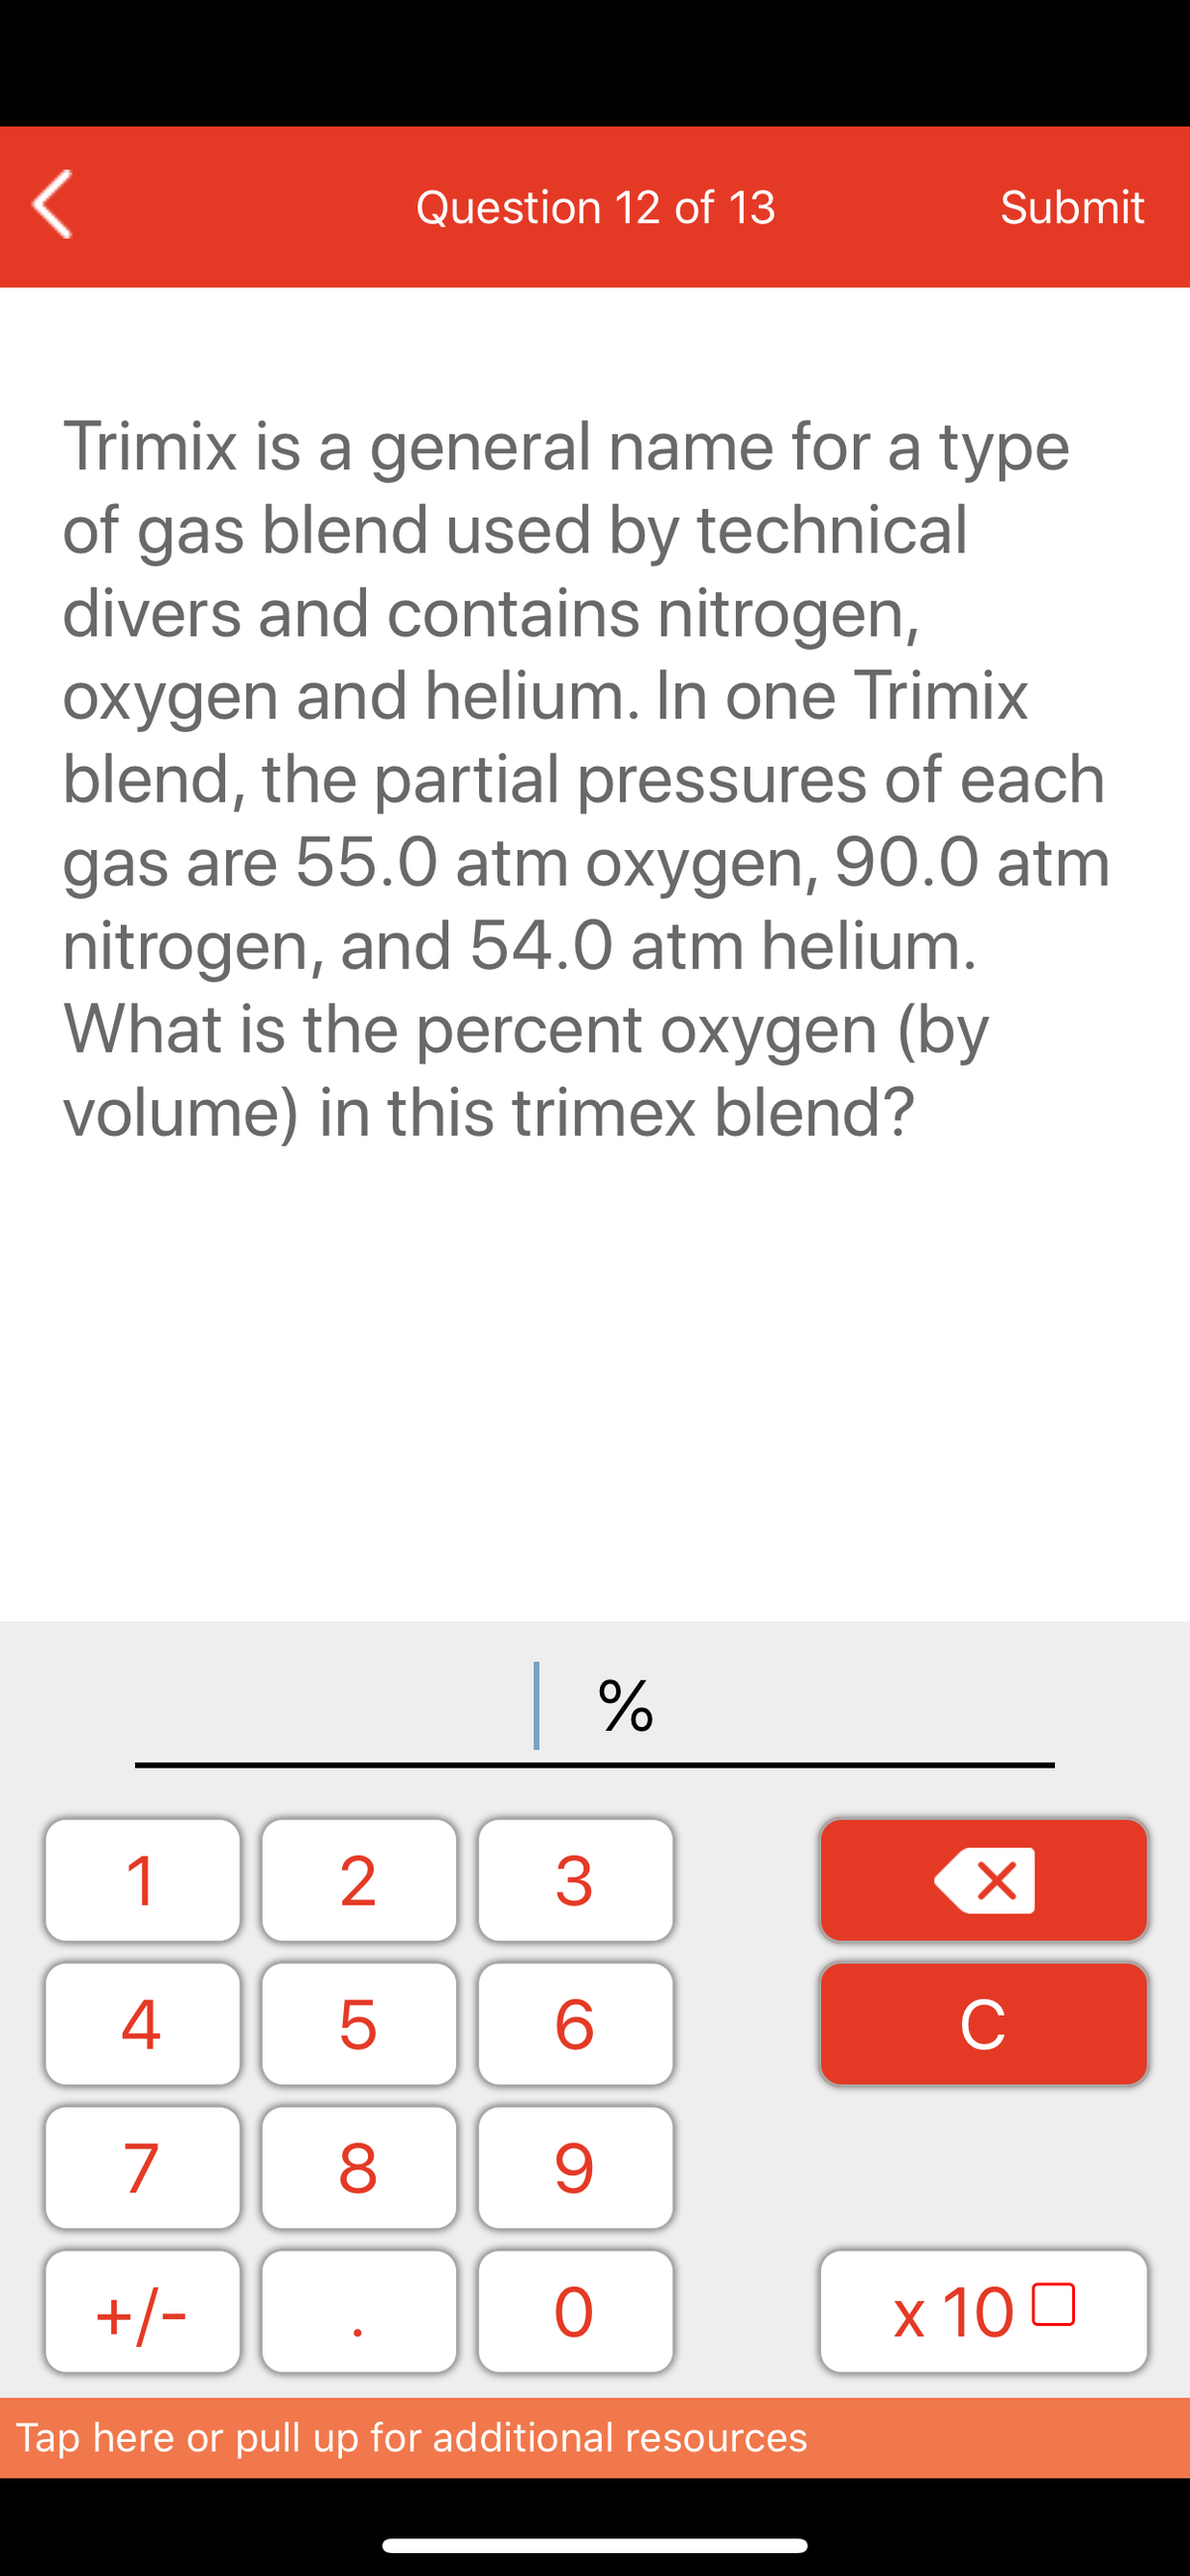 Question 12 of 13
Submit
Trimix is a general name for a type
of gas blend used by technical
divers and contains nitrogen,
oxygen and helium. In one Trimix
blend, the partial pressures of each
gas are 55.0 atm oxygen, 90.0 atm
nitrogen, and 54.0 atm helium.
What is the percent oxygen (by
volume) in this trimex blend?
| %
1
3
6
C
7
8
+/-
ㅇ
x 10 0
Tap here or pull up for additional resources
LO
